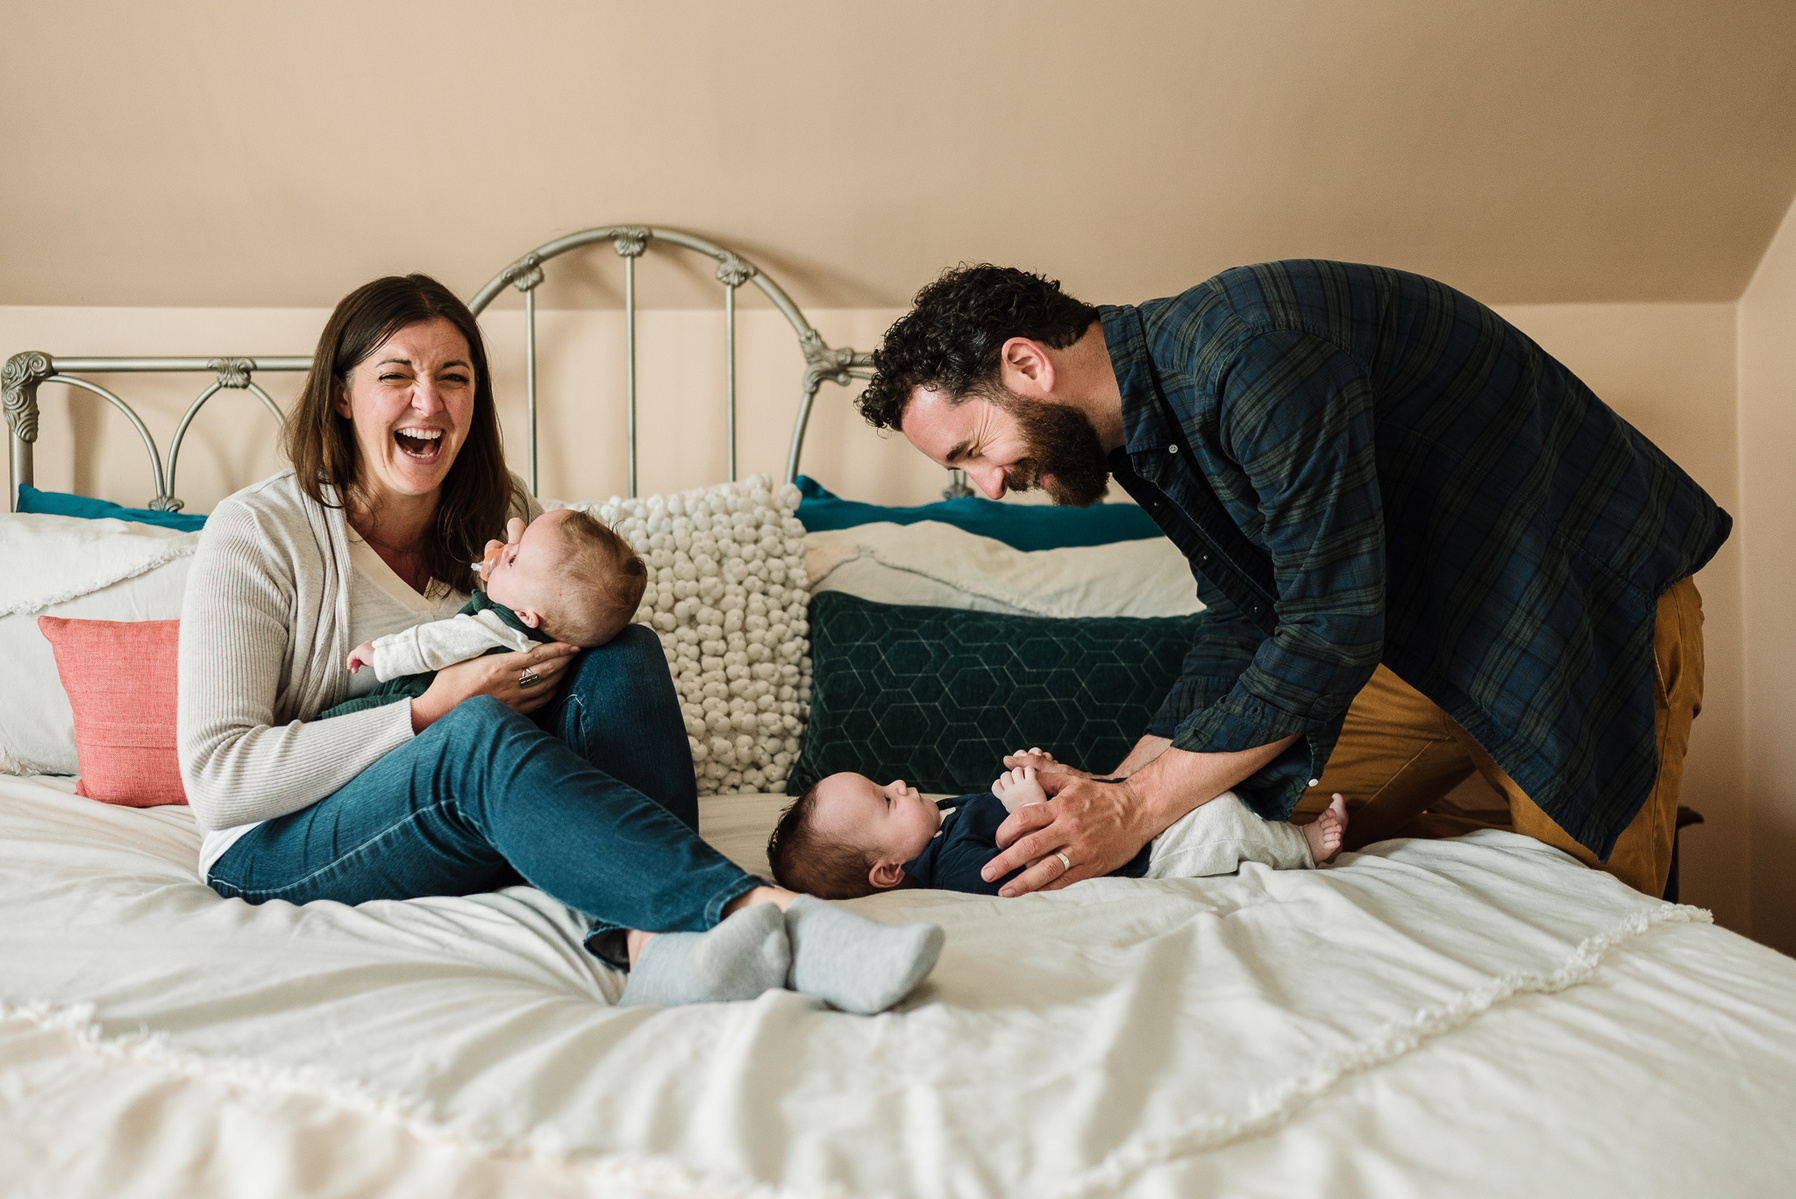 Parents laugh and smile while holding their newborn twins on a bed